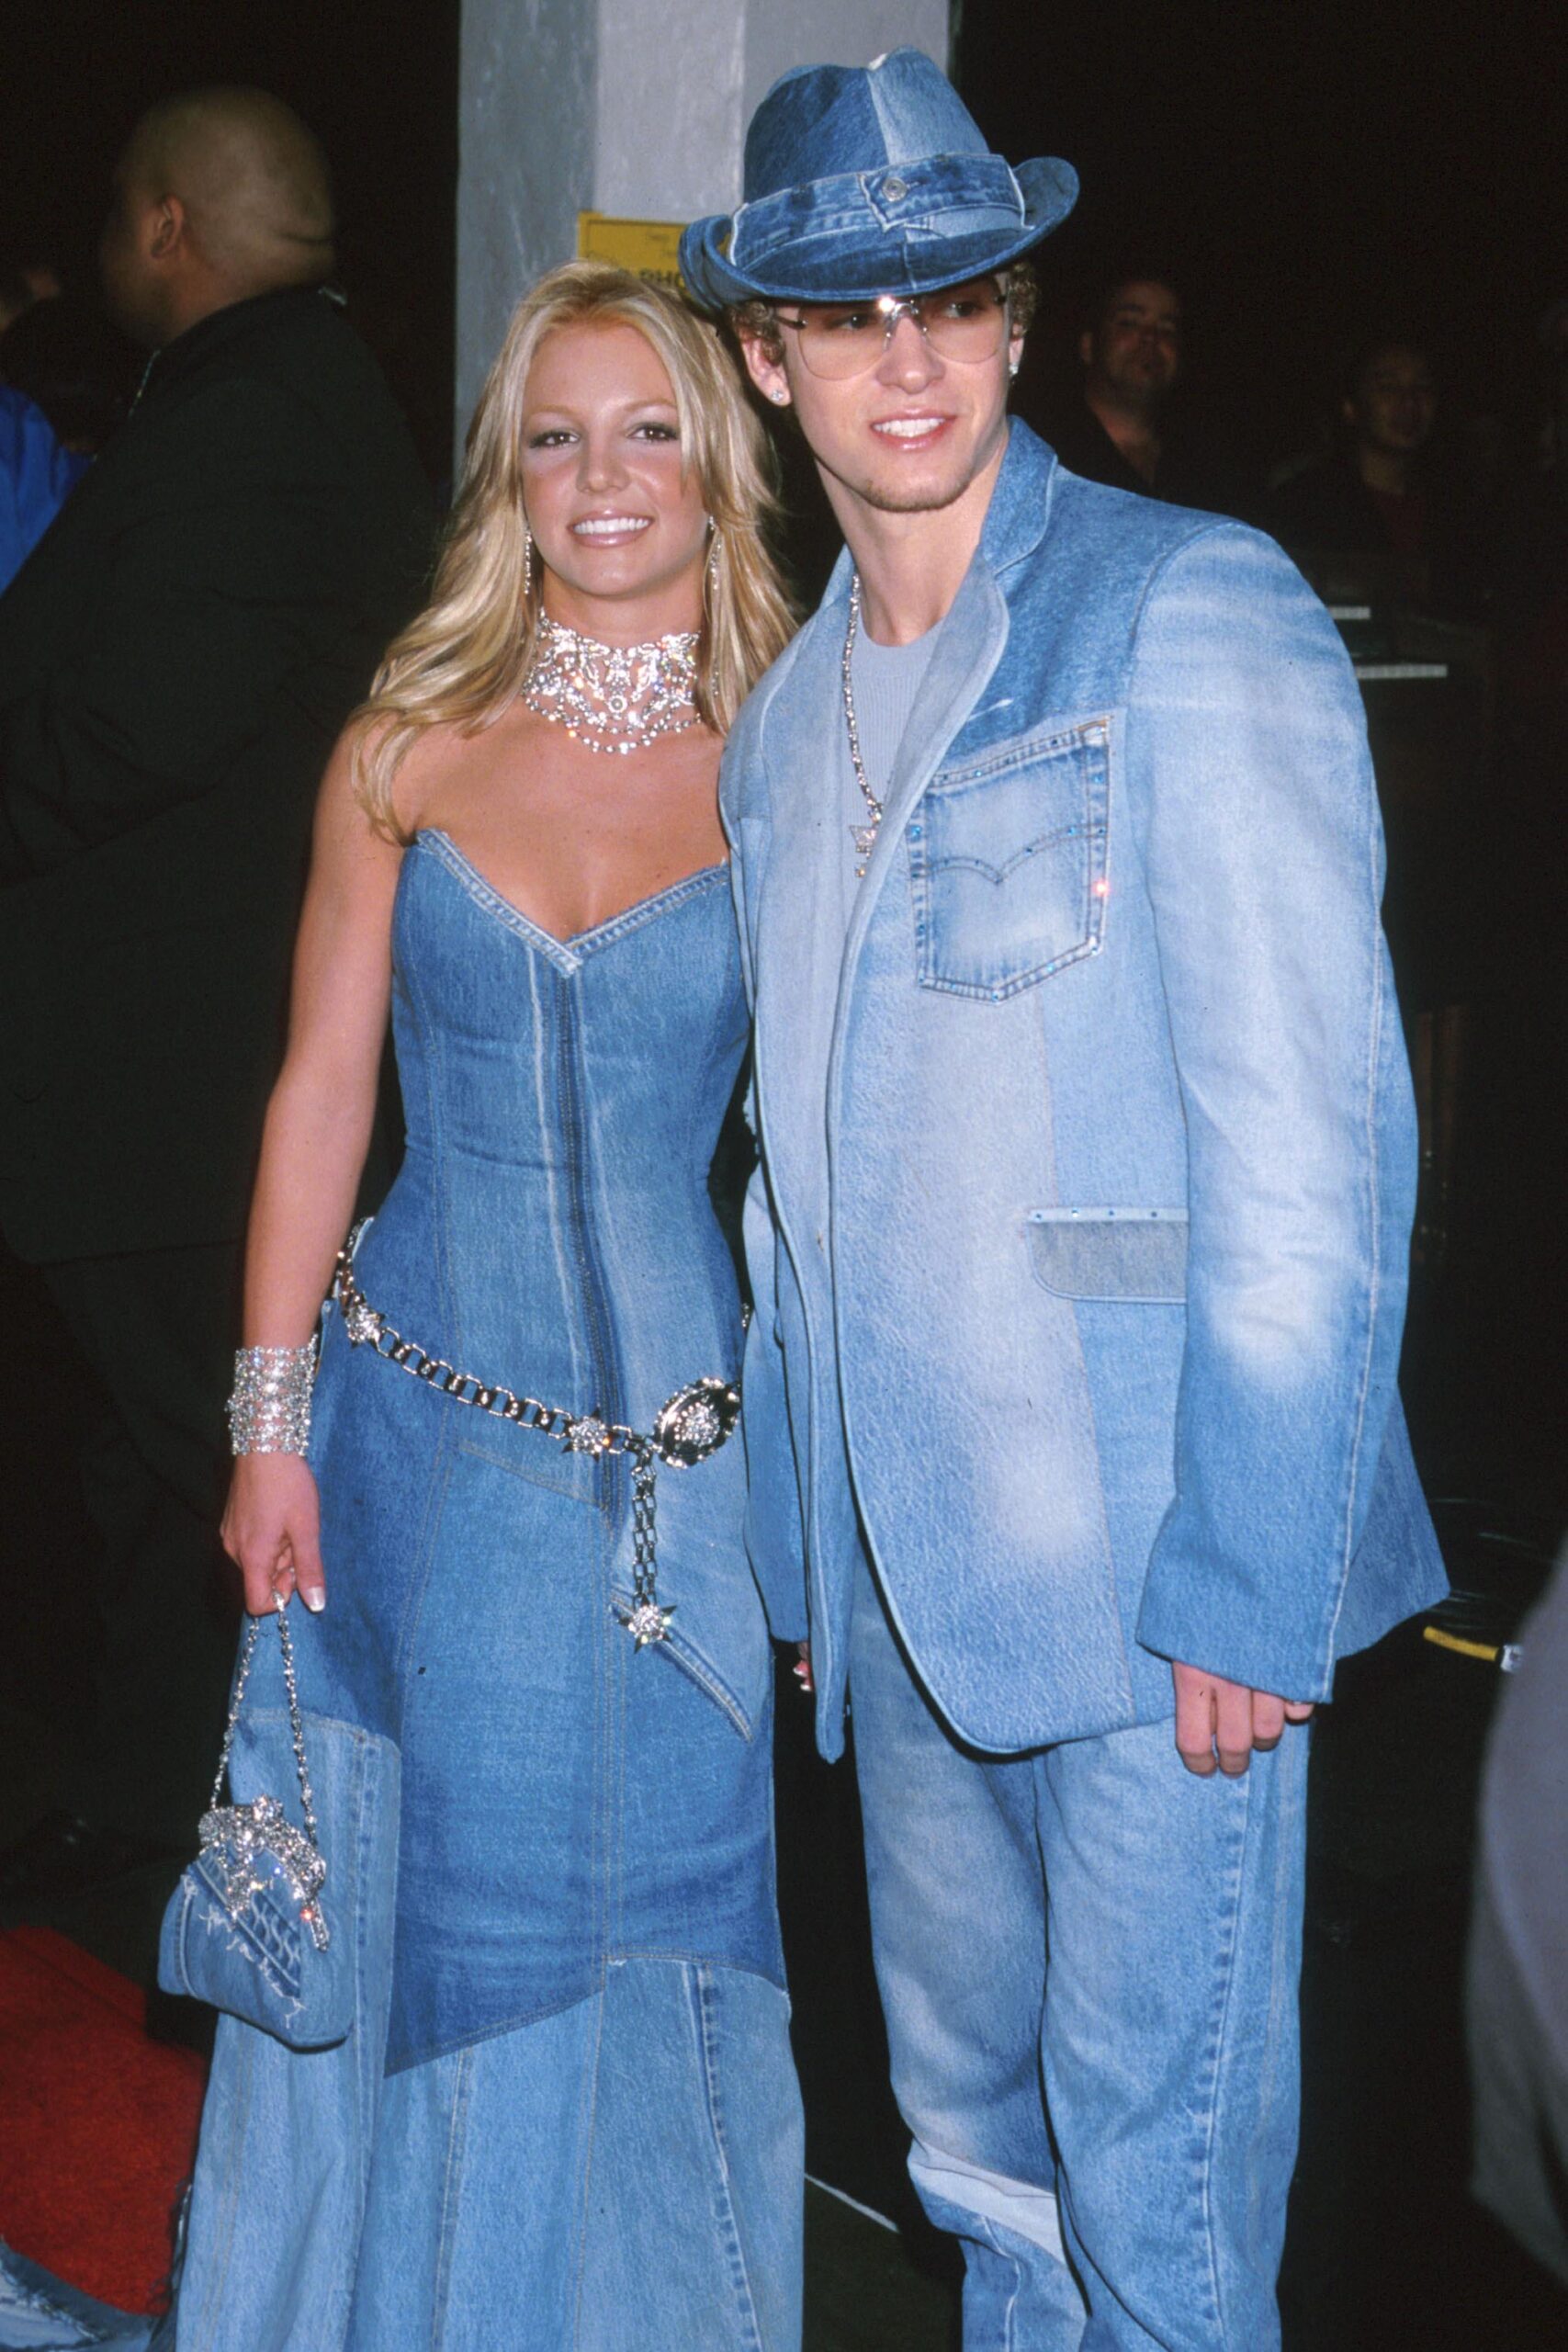 Britney Spears and Justin Timberlake's denim outfits